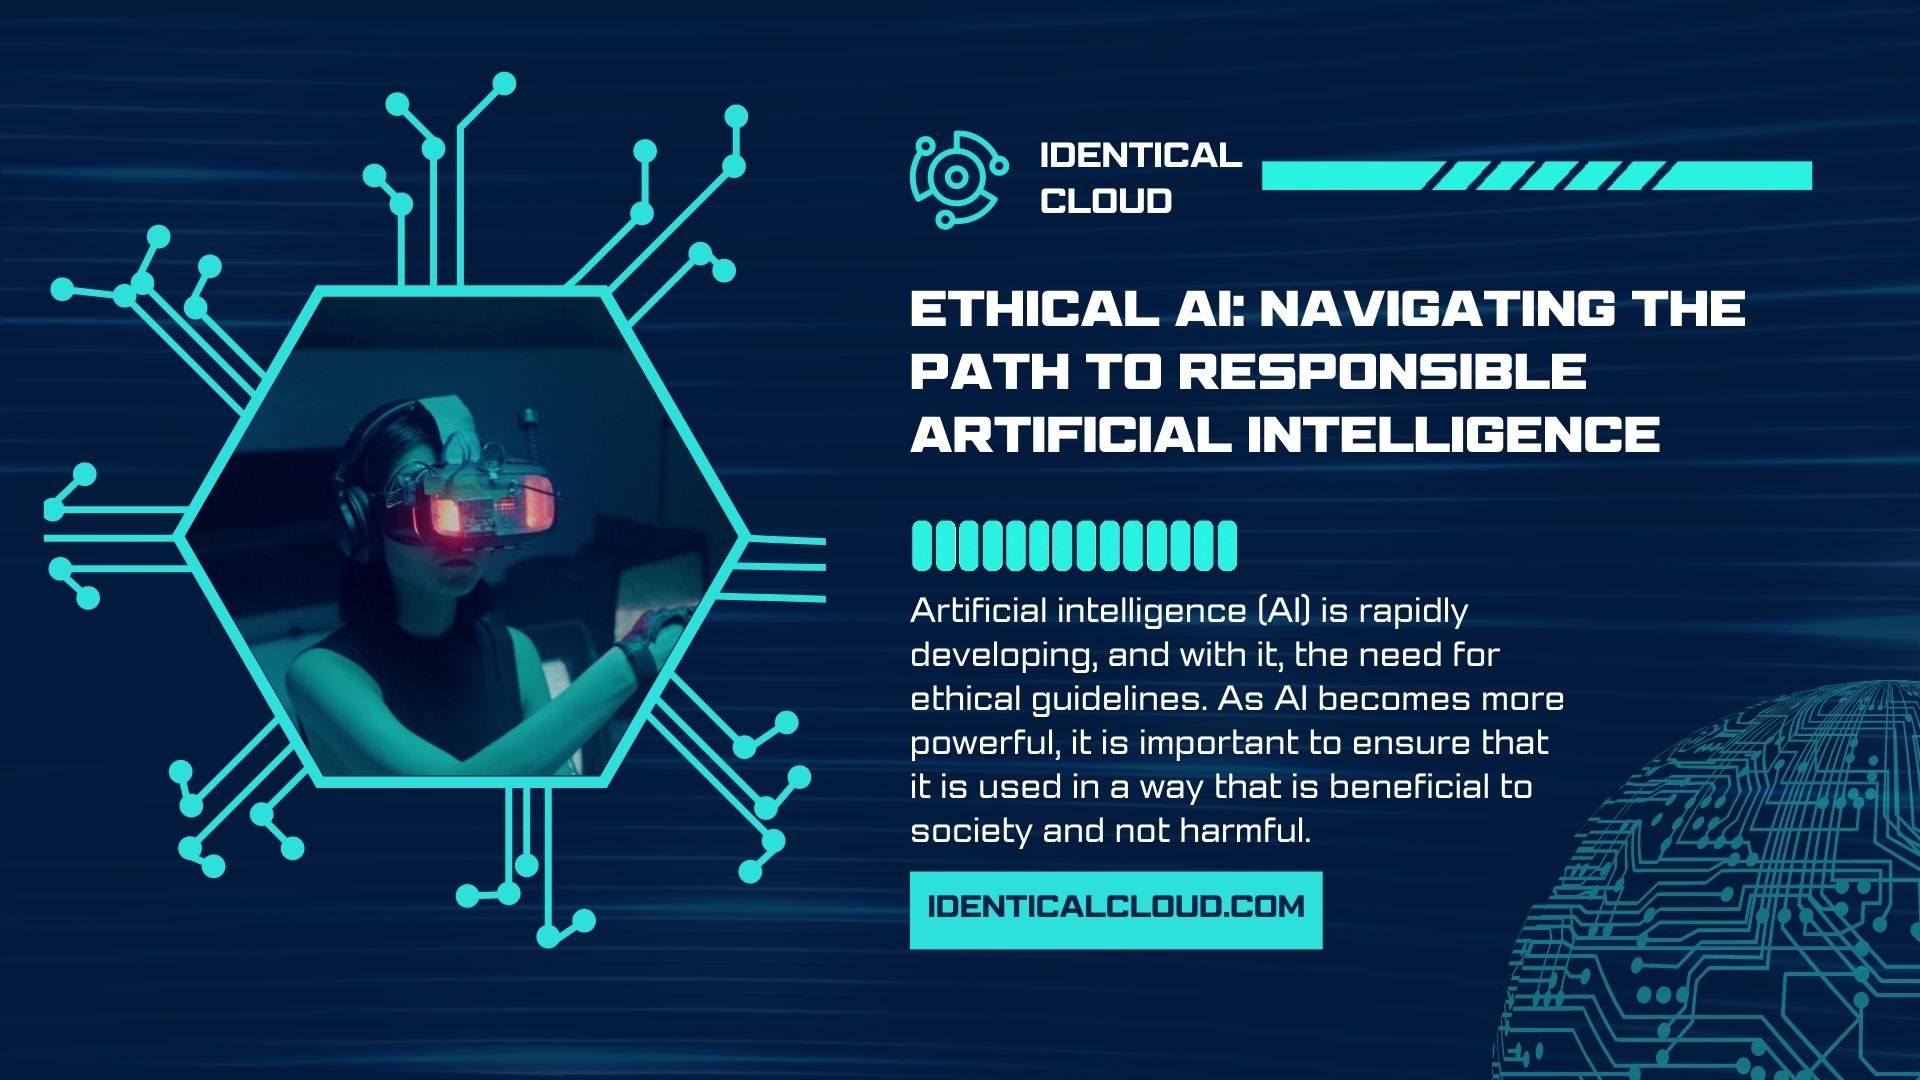 Ethical AI: Navigating the Path to Responsible Artificial Intelligence - identicalcloud.com